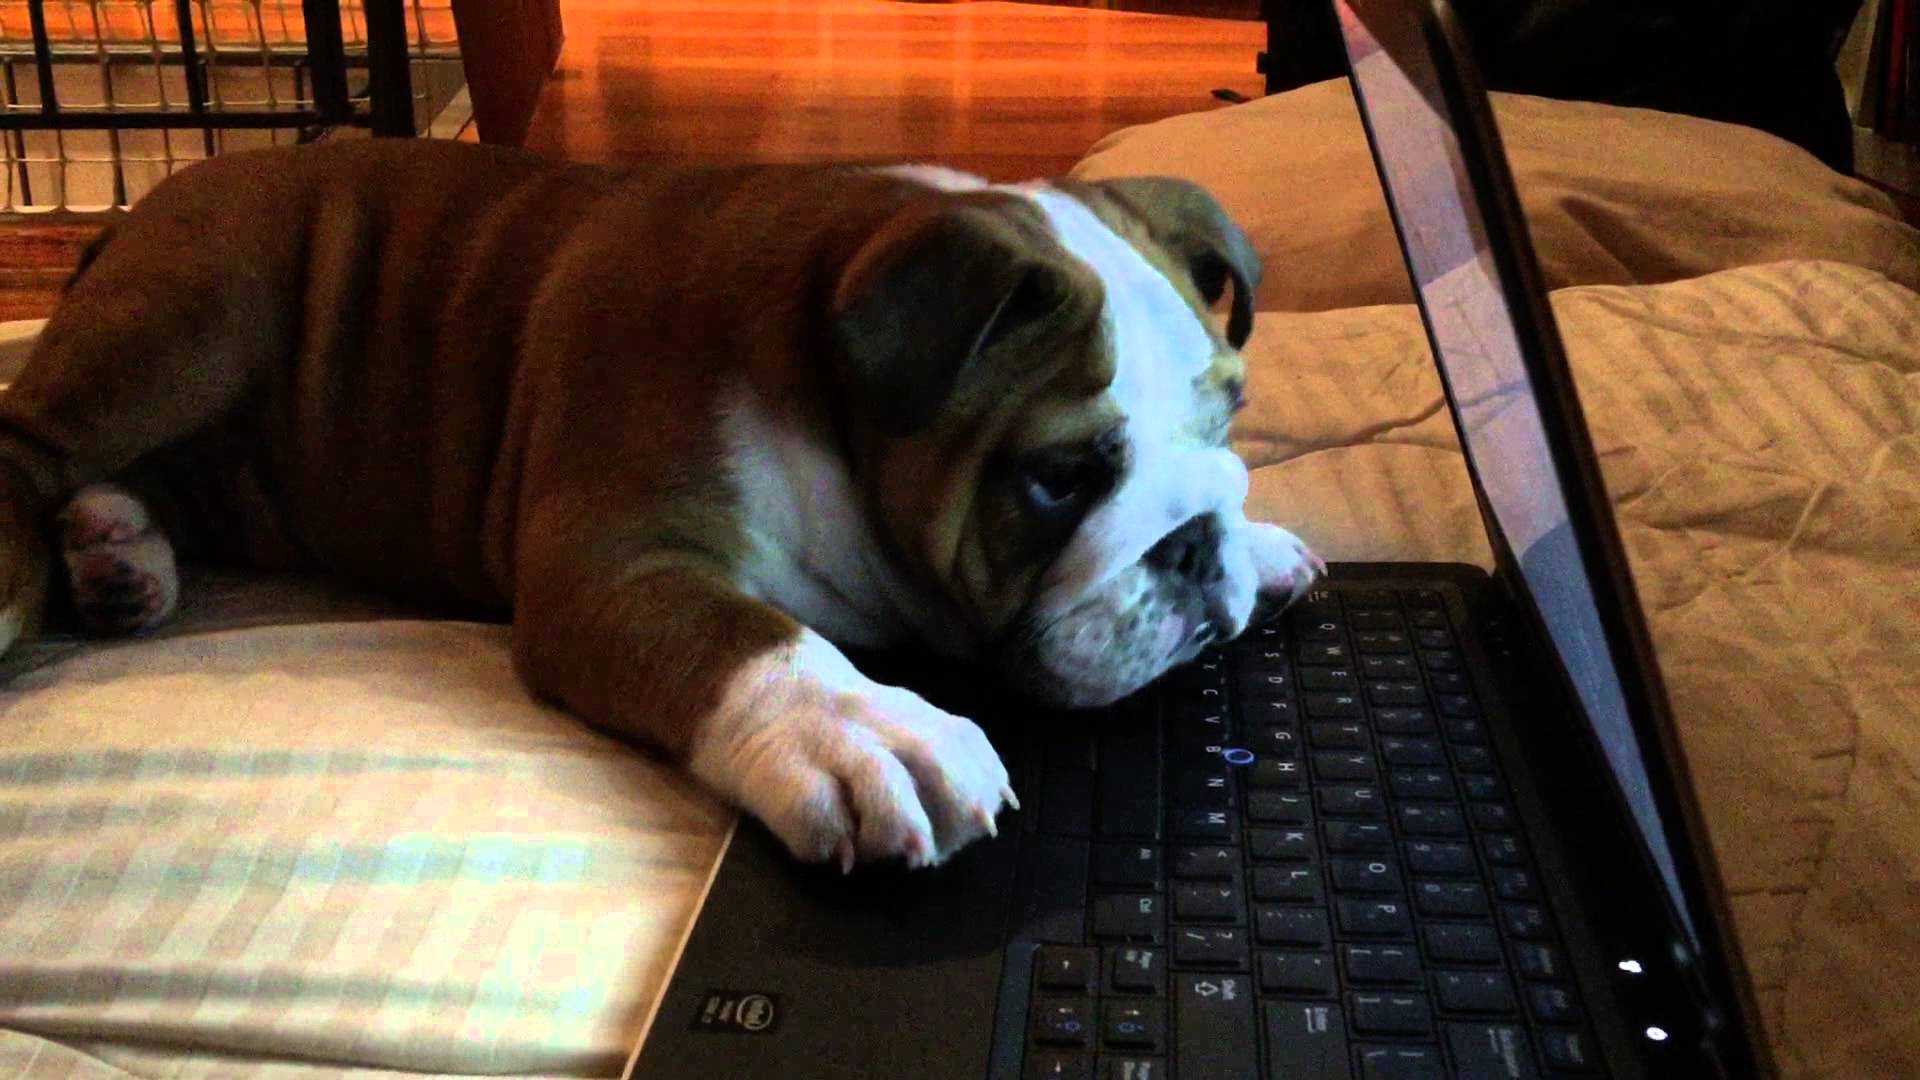 Sad puppy in front of a computer.